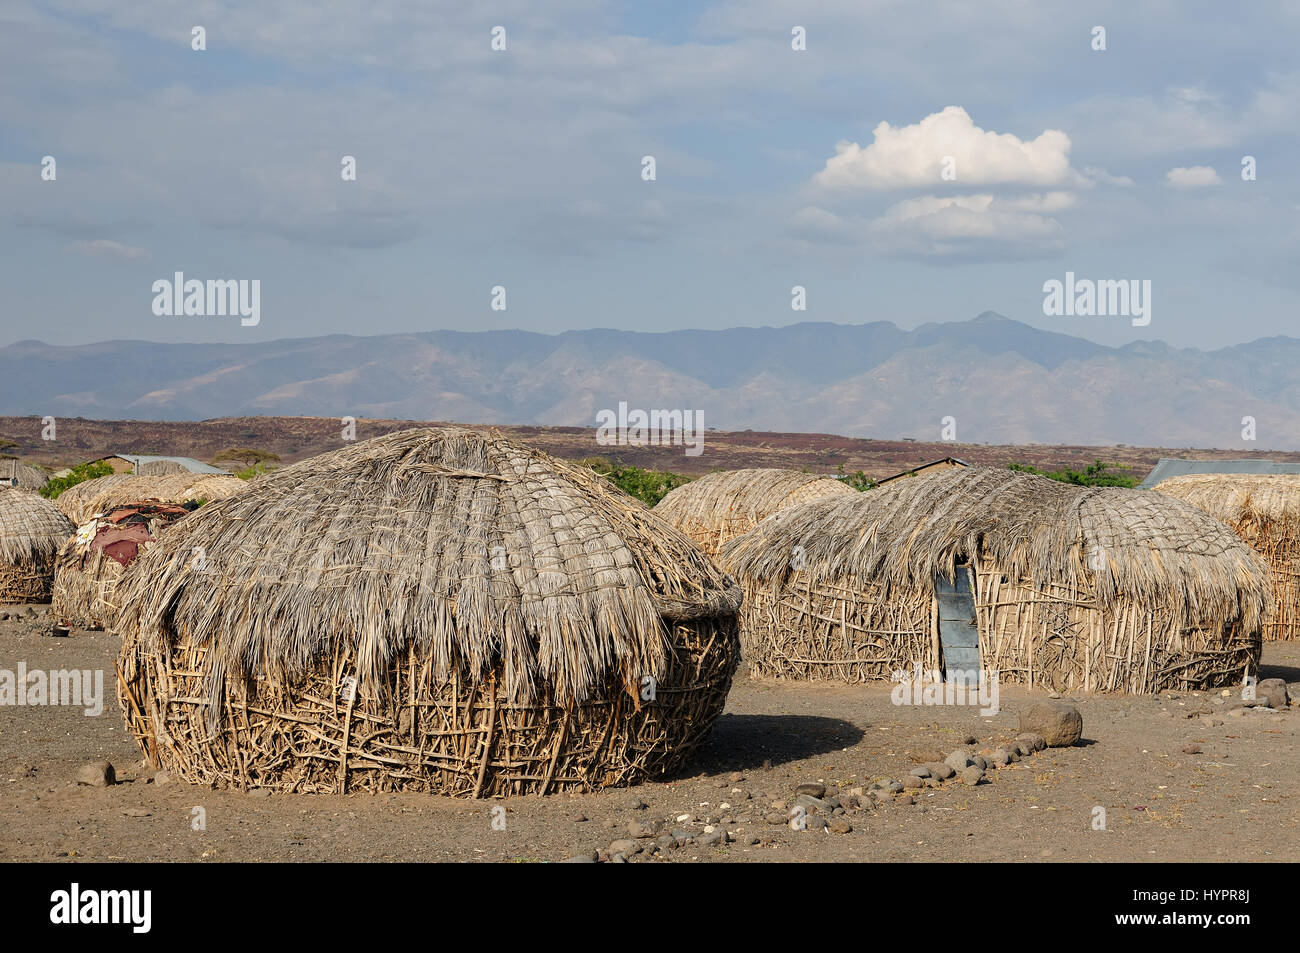 Traditional round house of people from the Turkana tribe on the shore of the lake Turkana in Kenya Stock Photo